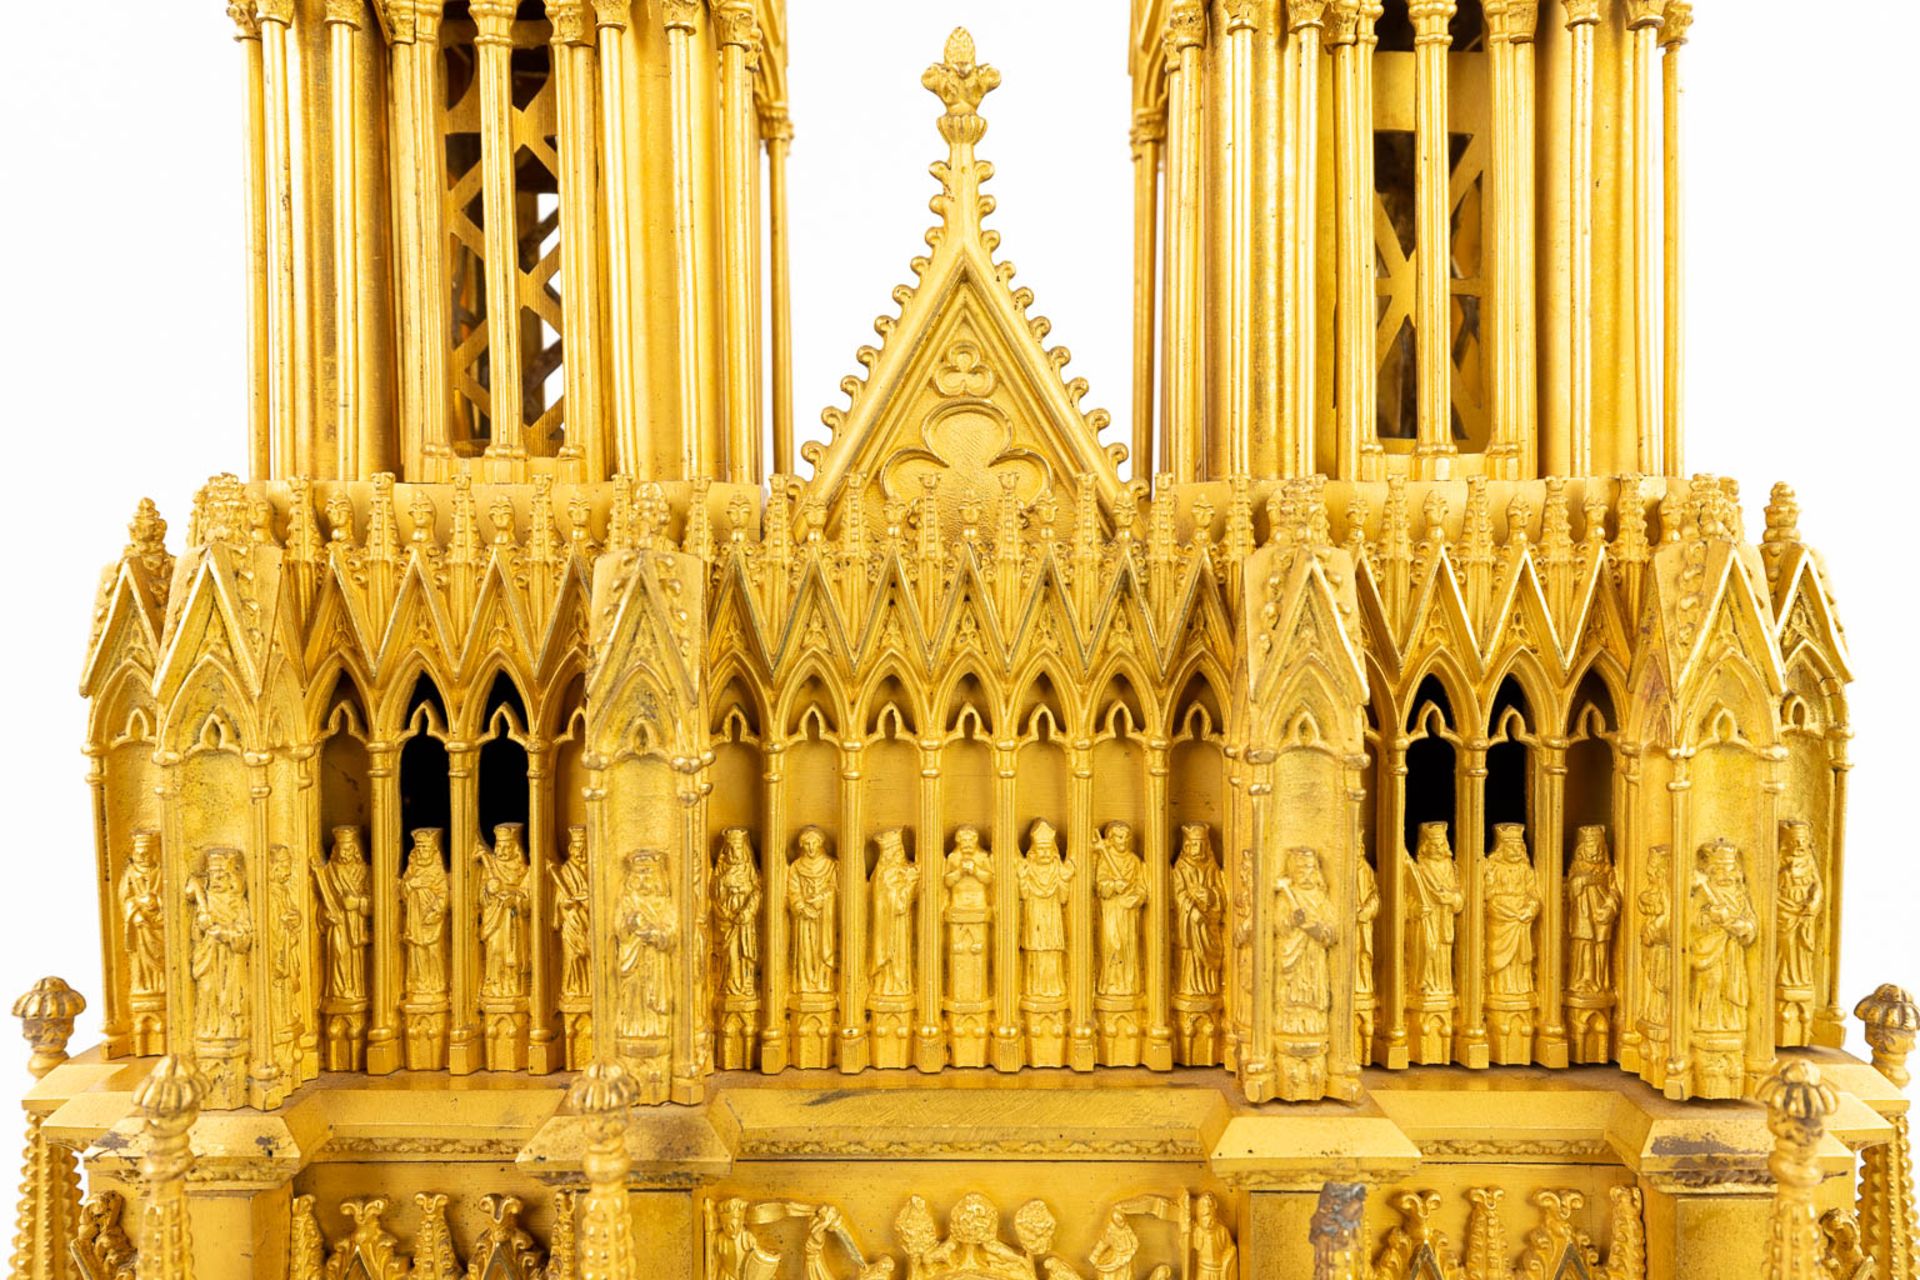 Cathedrale de Reims, an exceptional mantle clock made of gilt bronze. (15 x 31 x 47cm) - Image 16 of 16